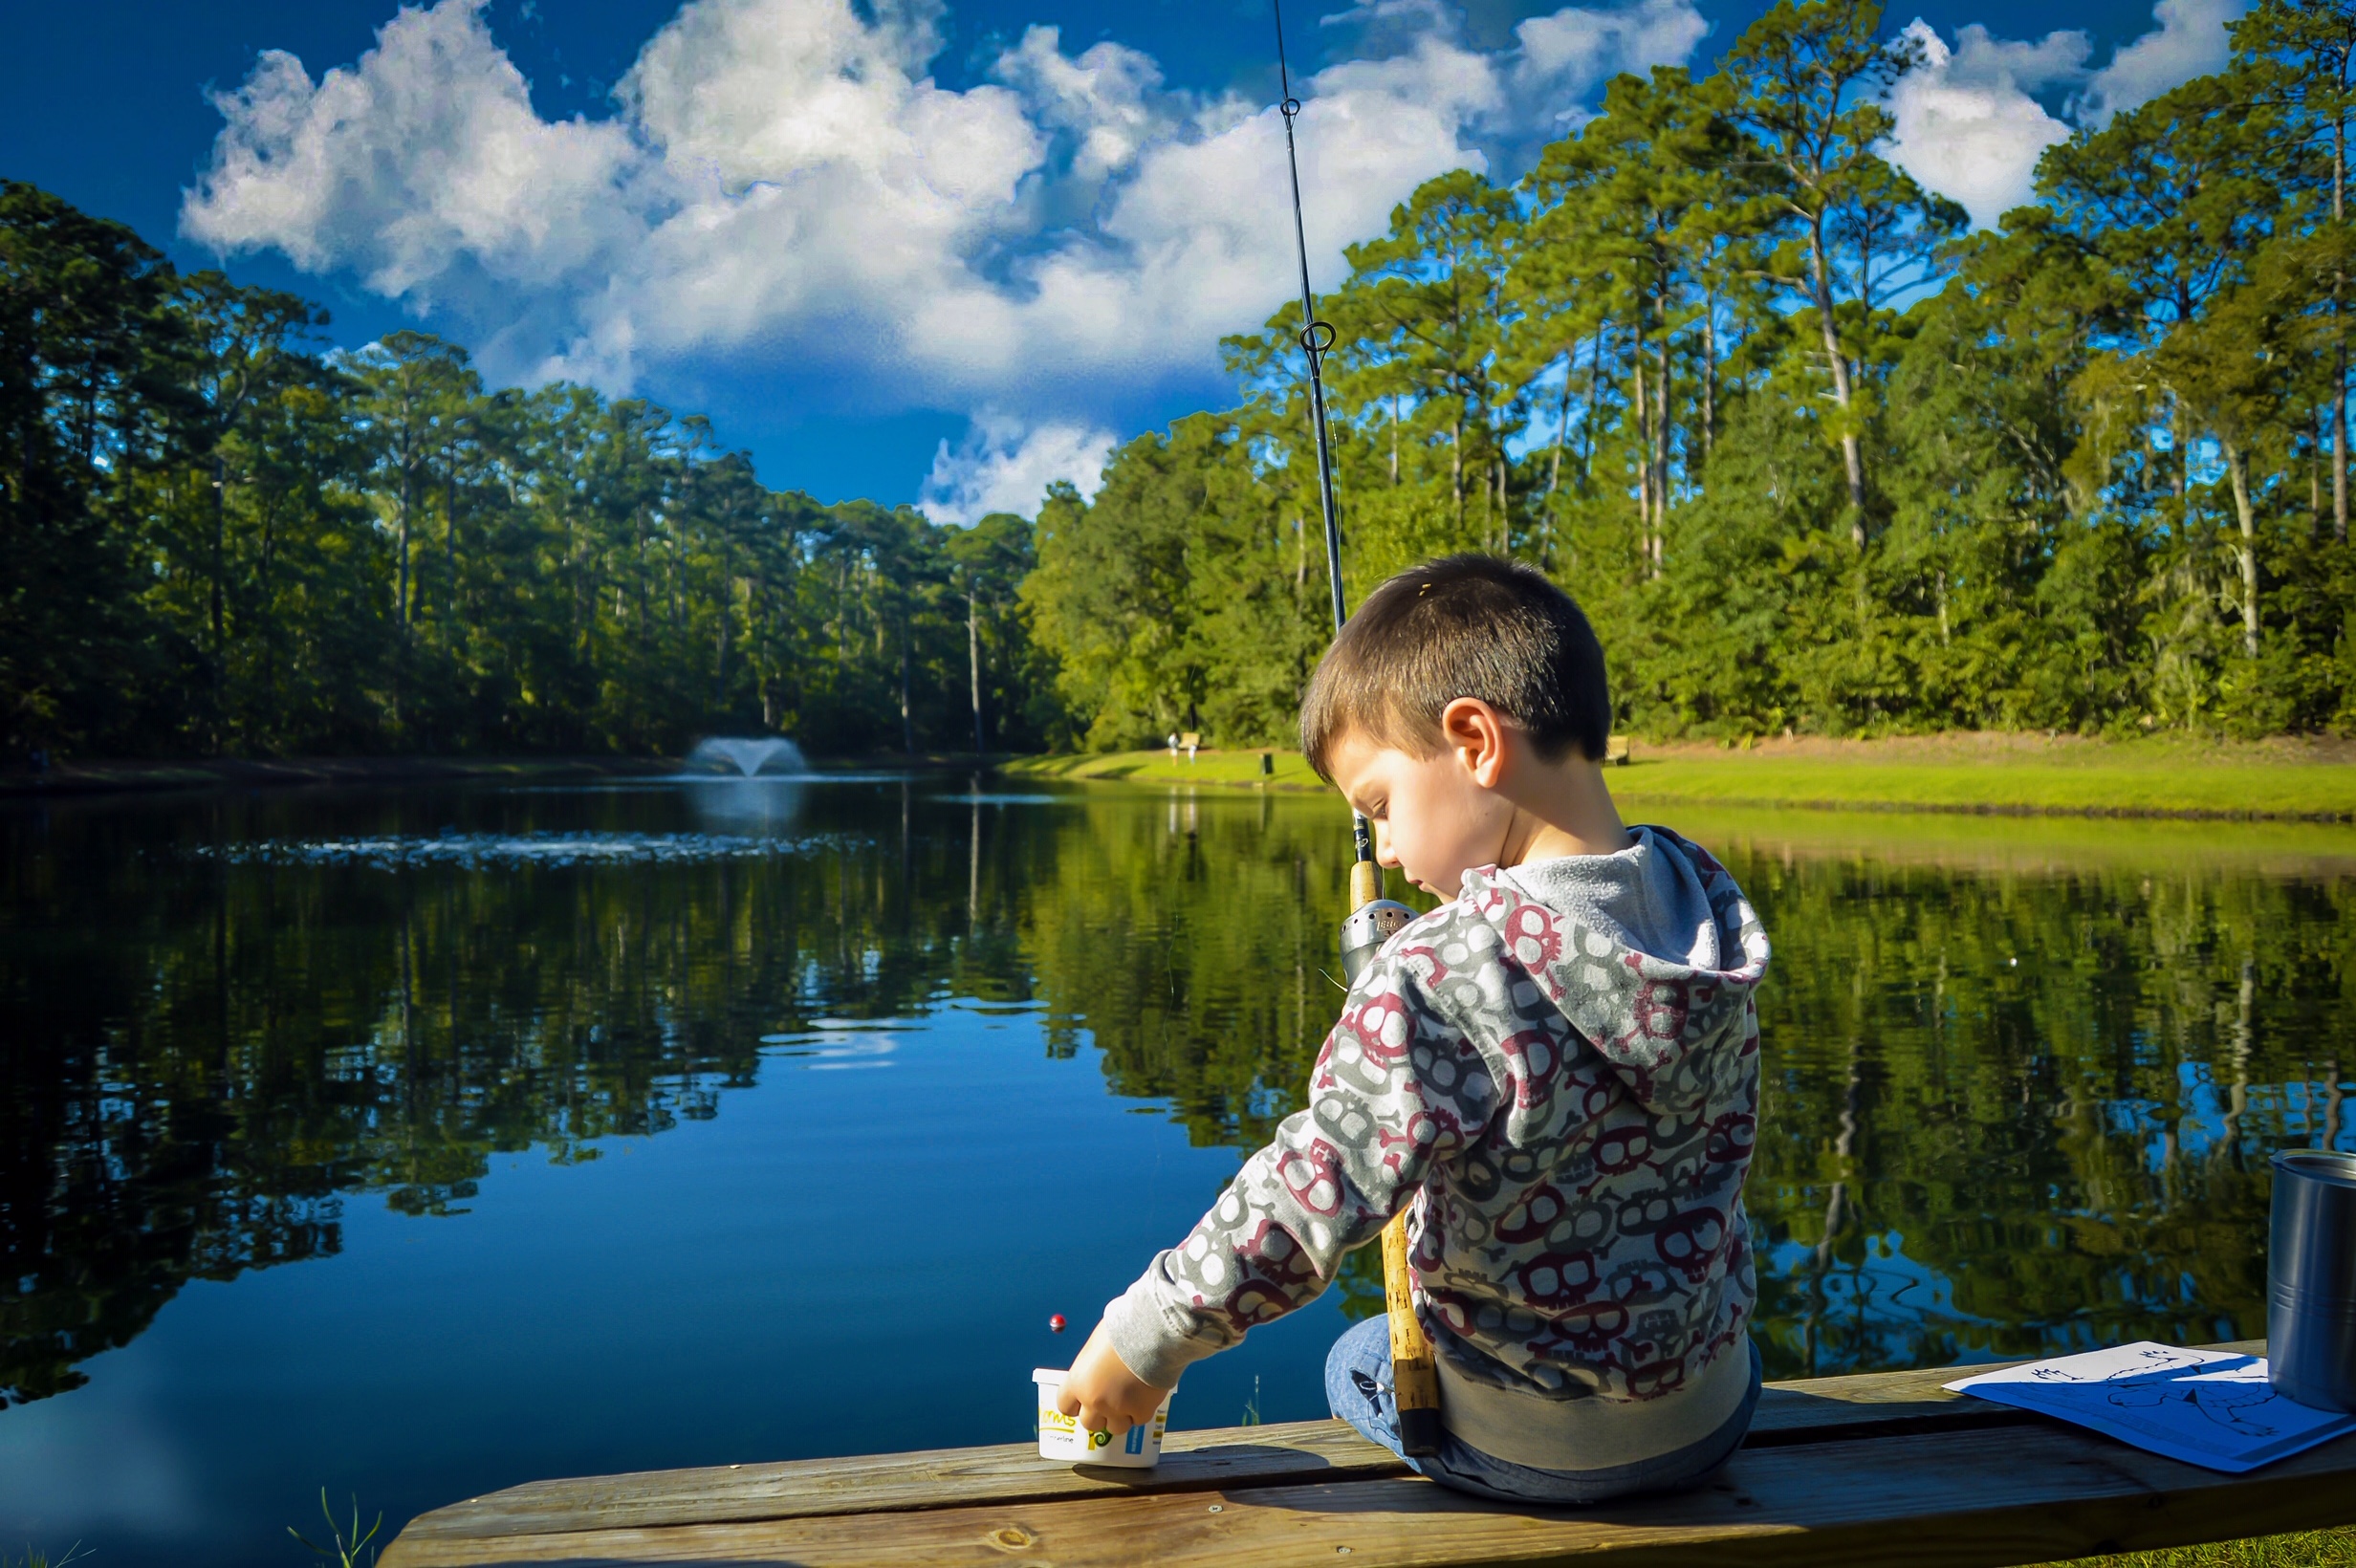 Little boy sitting on a bench reaching for bait. A lake is in the background.